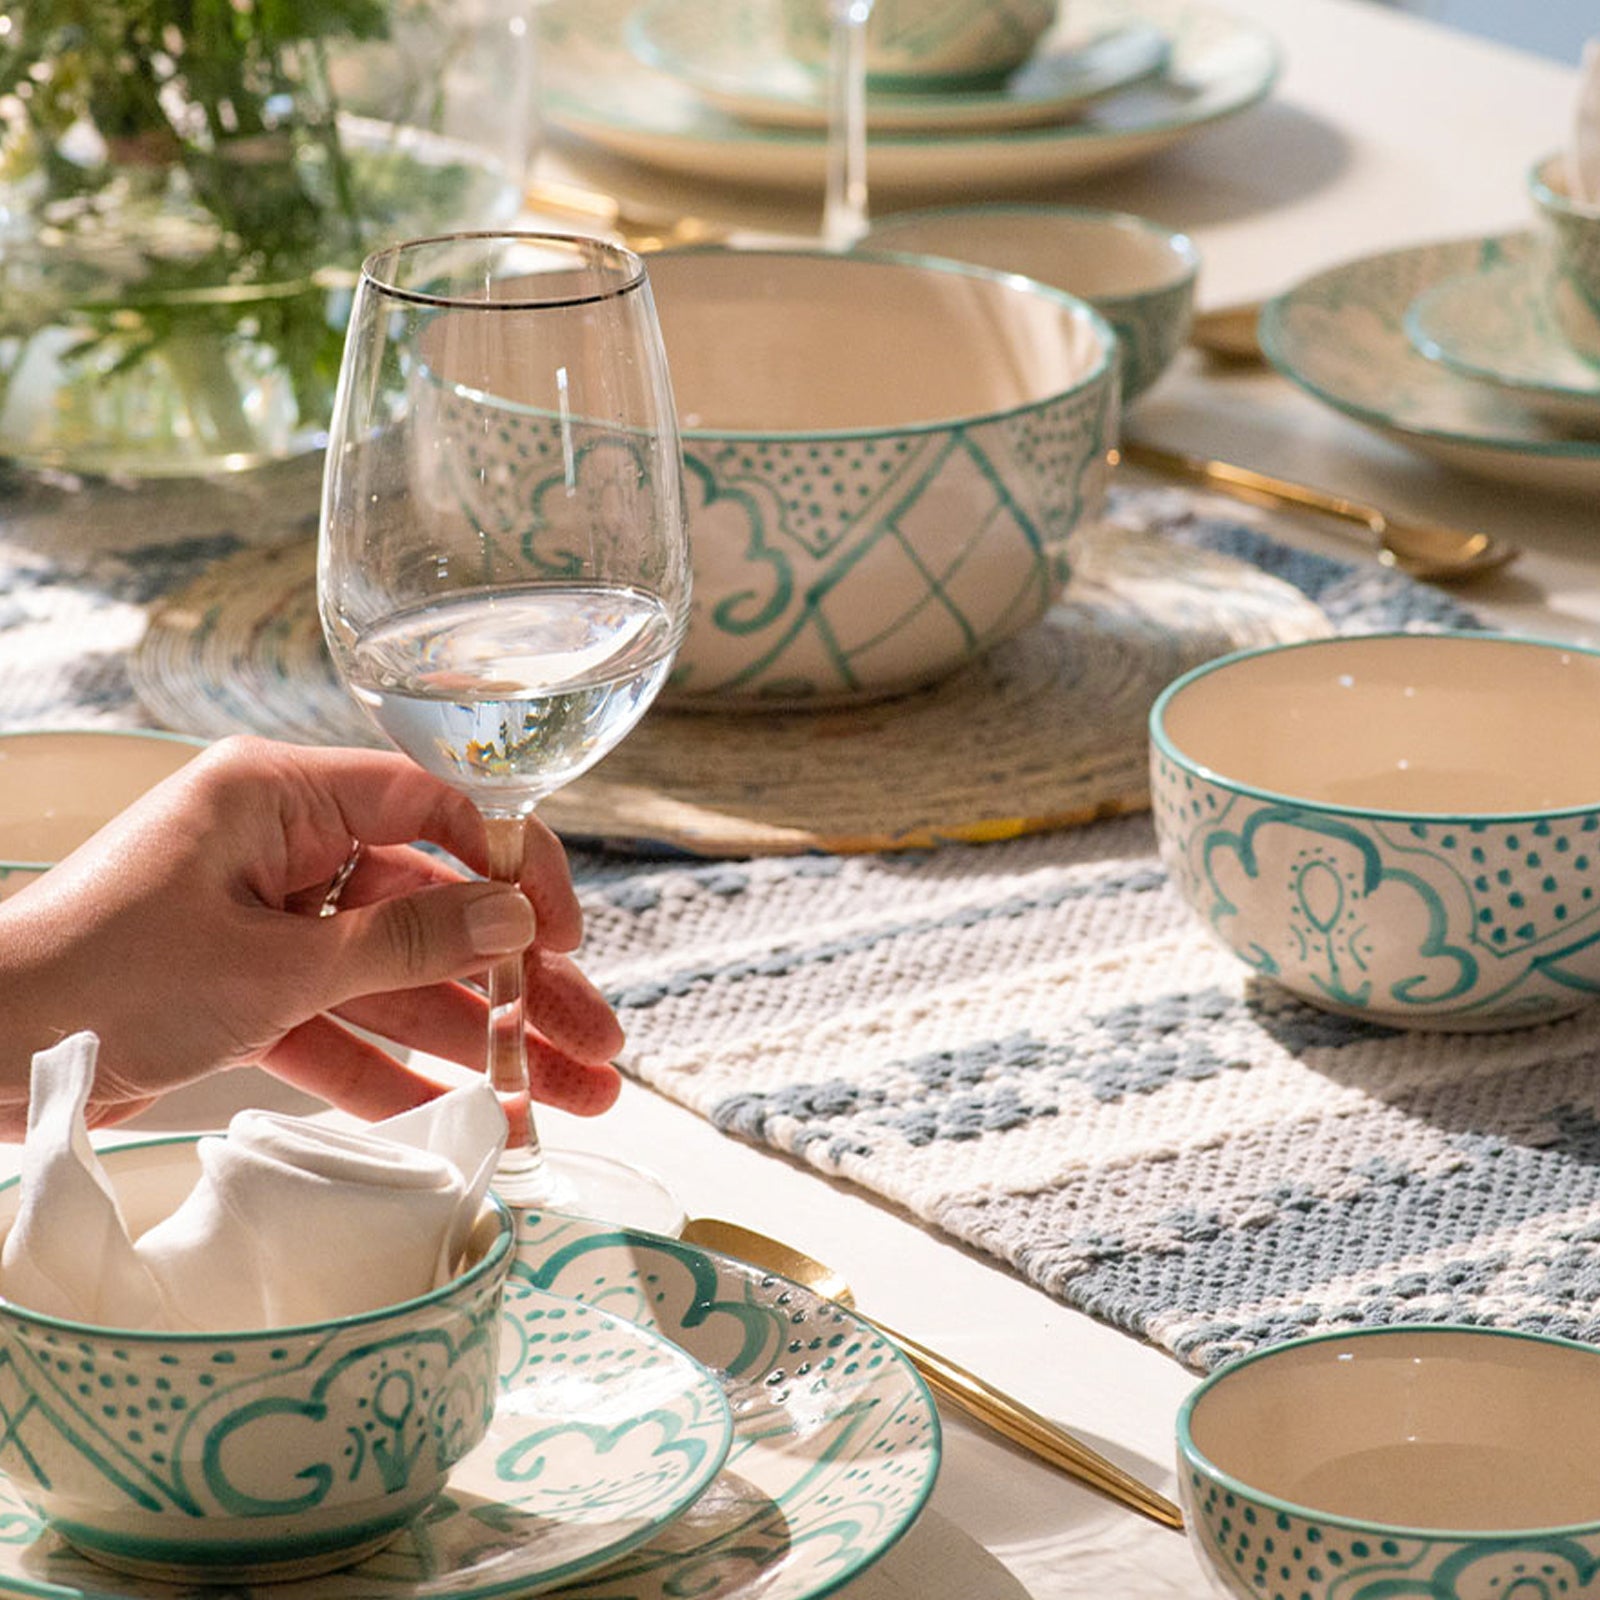 45 Lovely Place Settings to Inspire Your Wedding Reception Tables